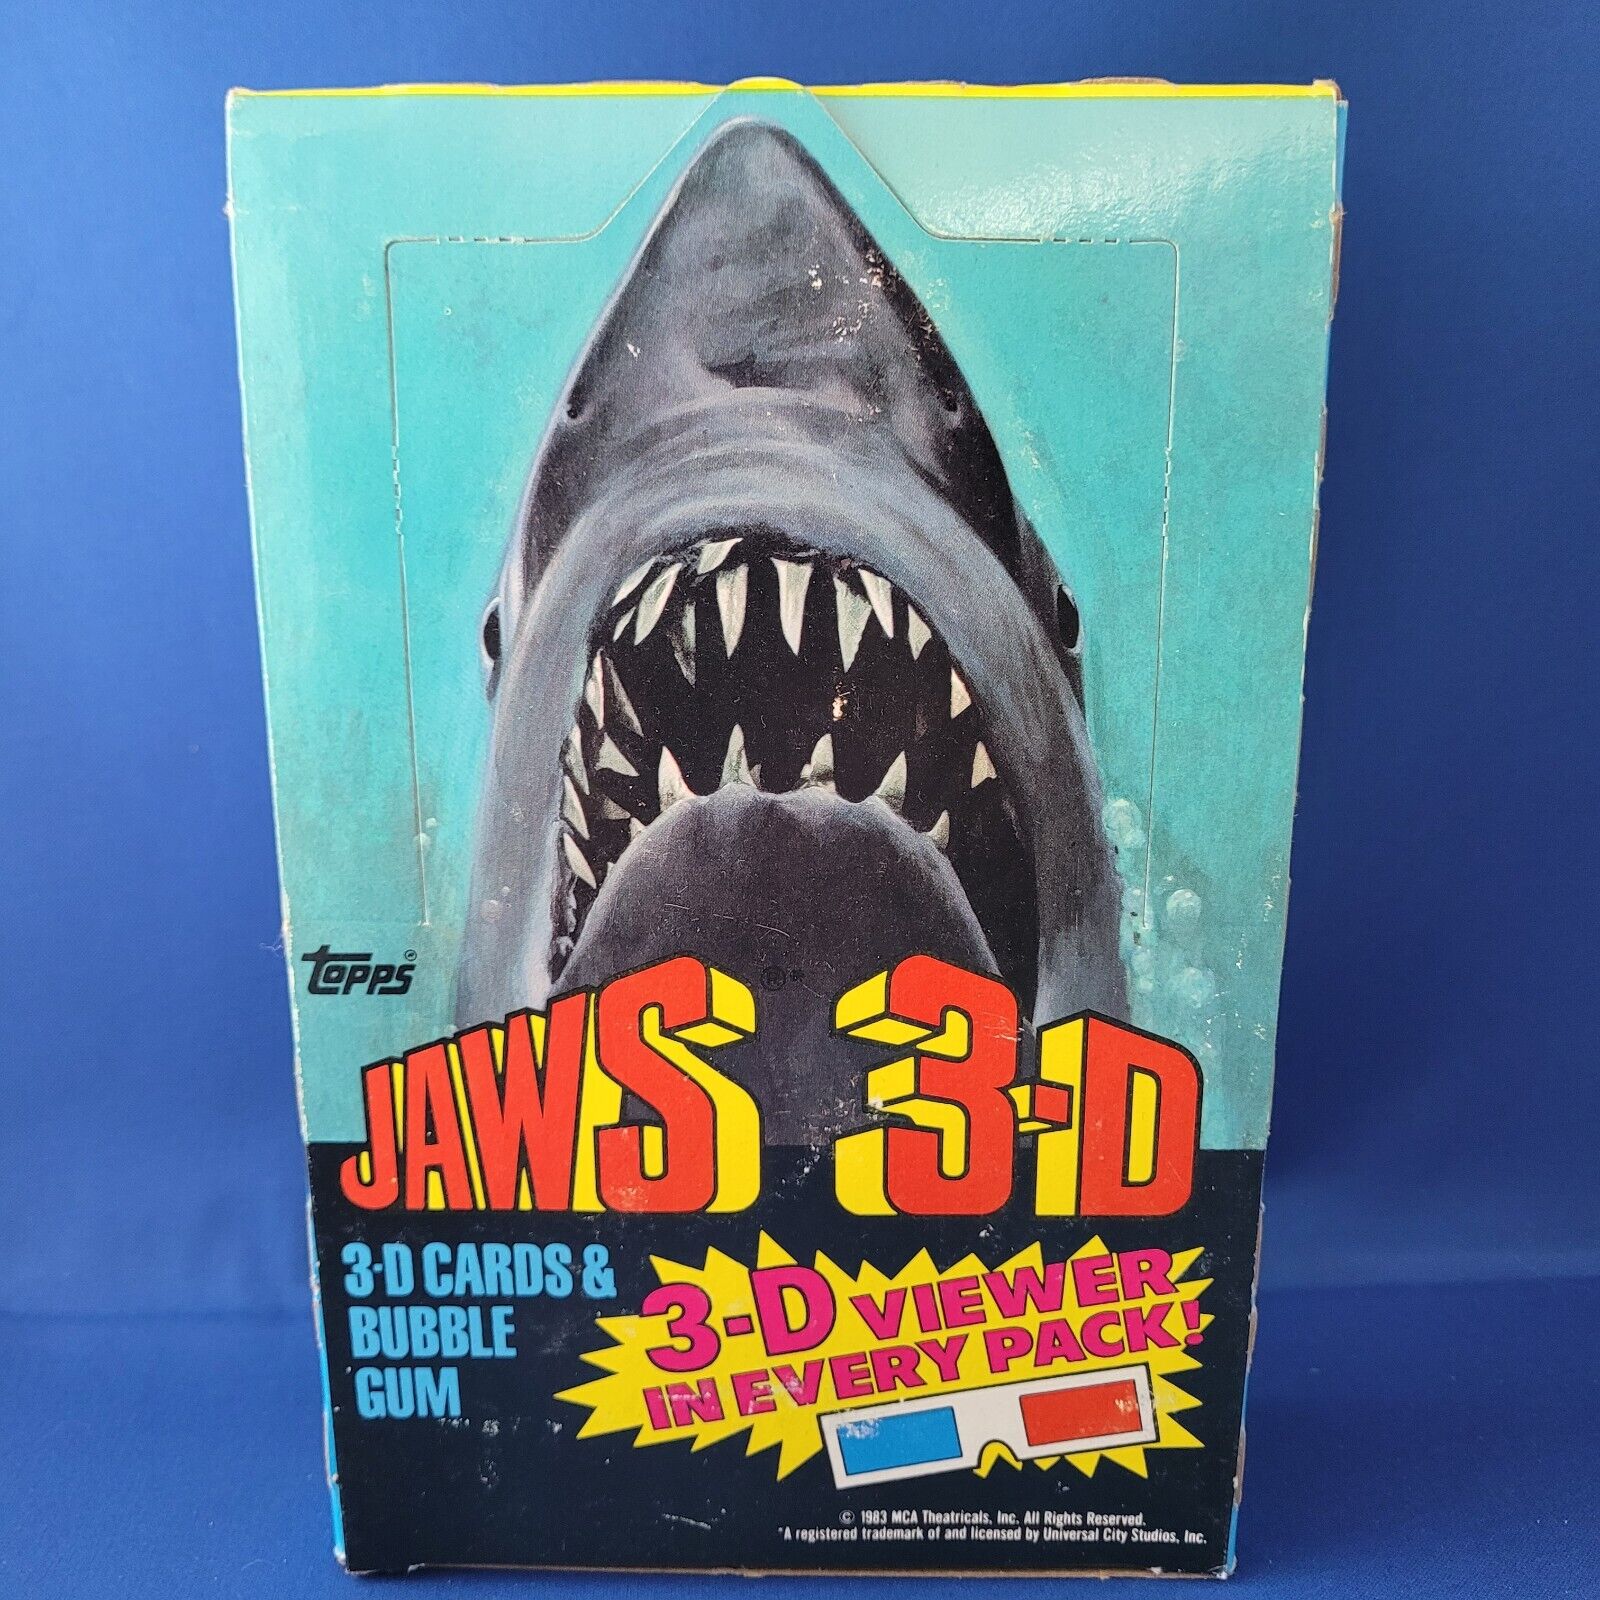 1983 Topps Jaws 3D Unopened Box 36 packs of 3-D cards & glasses NEW